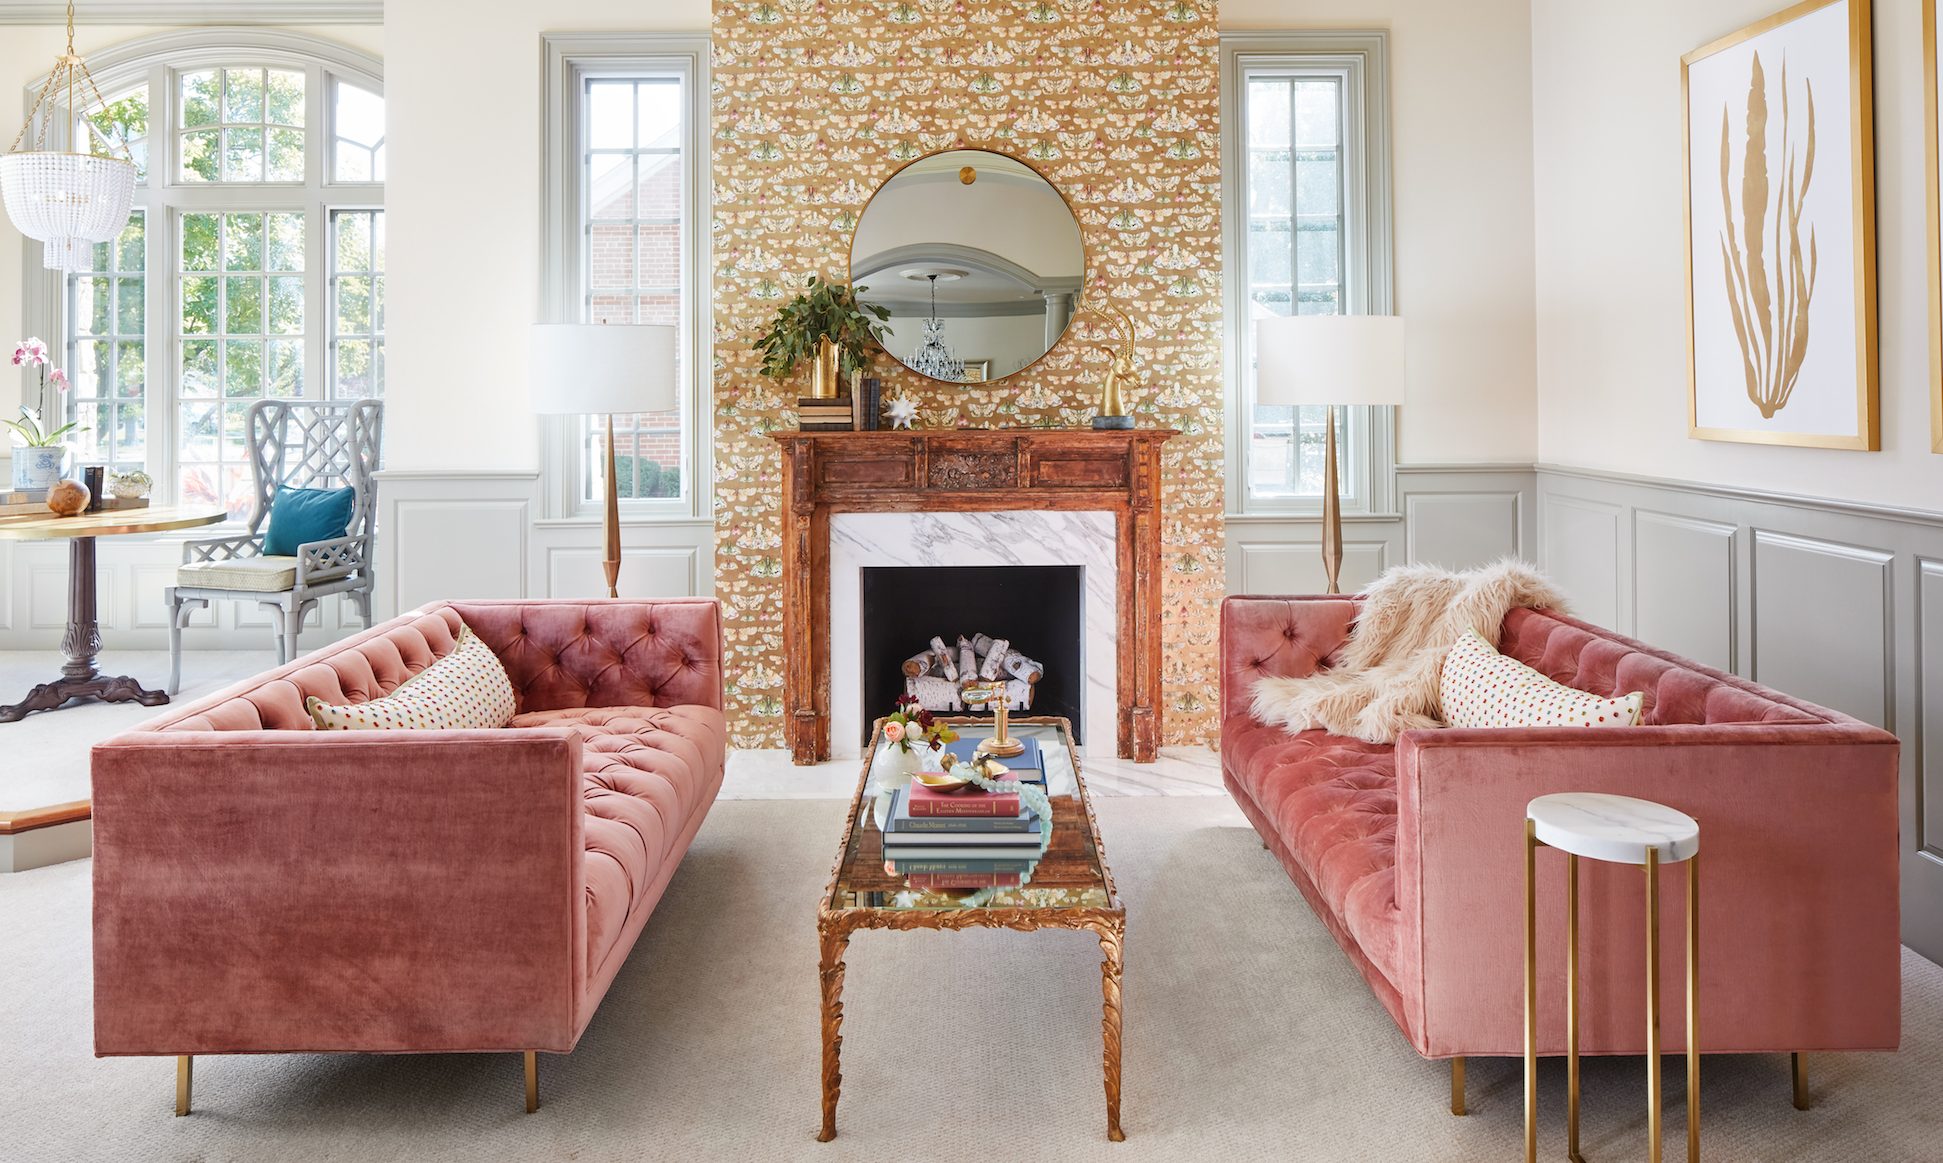 Two pink velvet sofas add texture to an otherwise minimalist living room